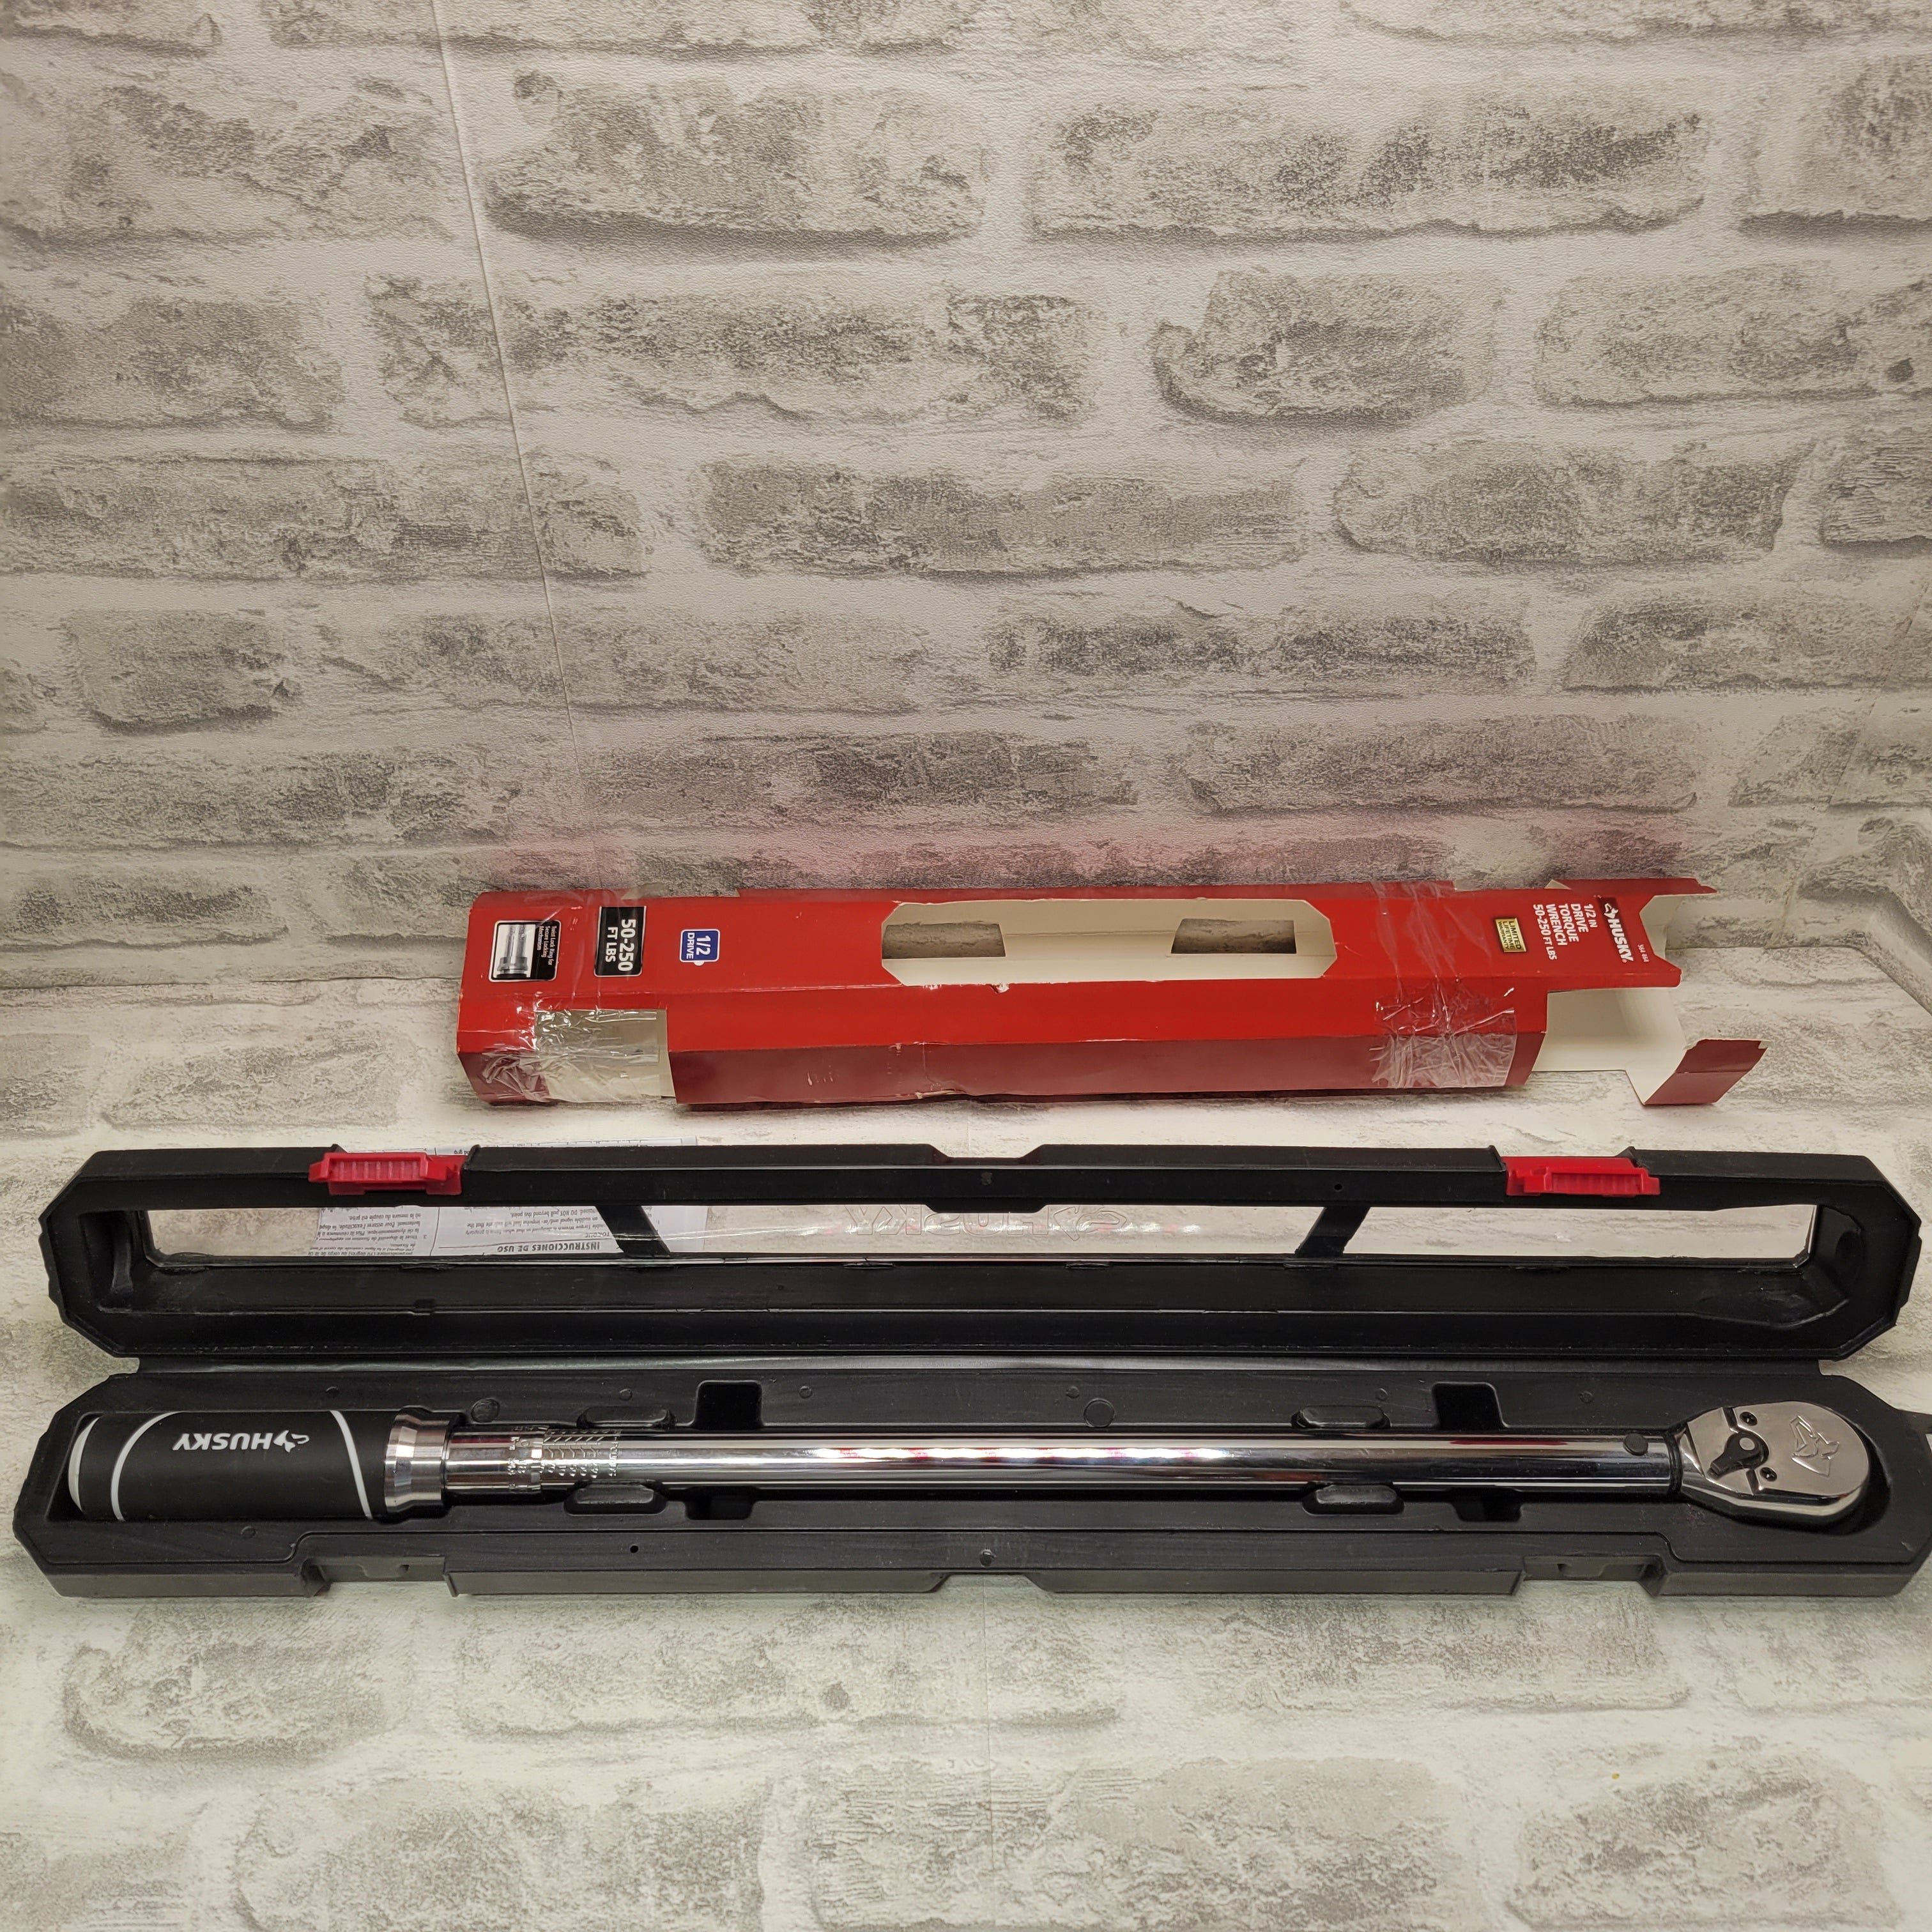 Husky 50 ft. /lbs. to 250 ft. /lbs. 1/2 in. Drive Torque Wrench (7624357118190)